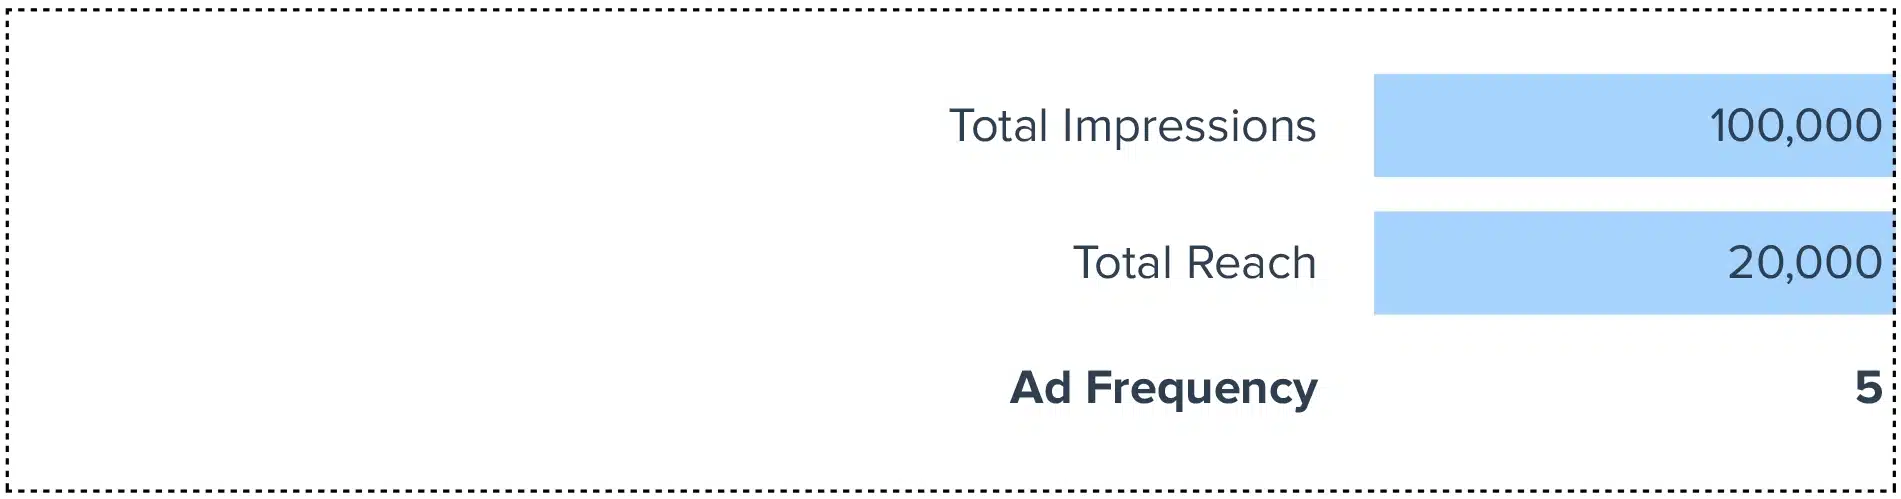 Ad Frequency